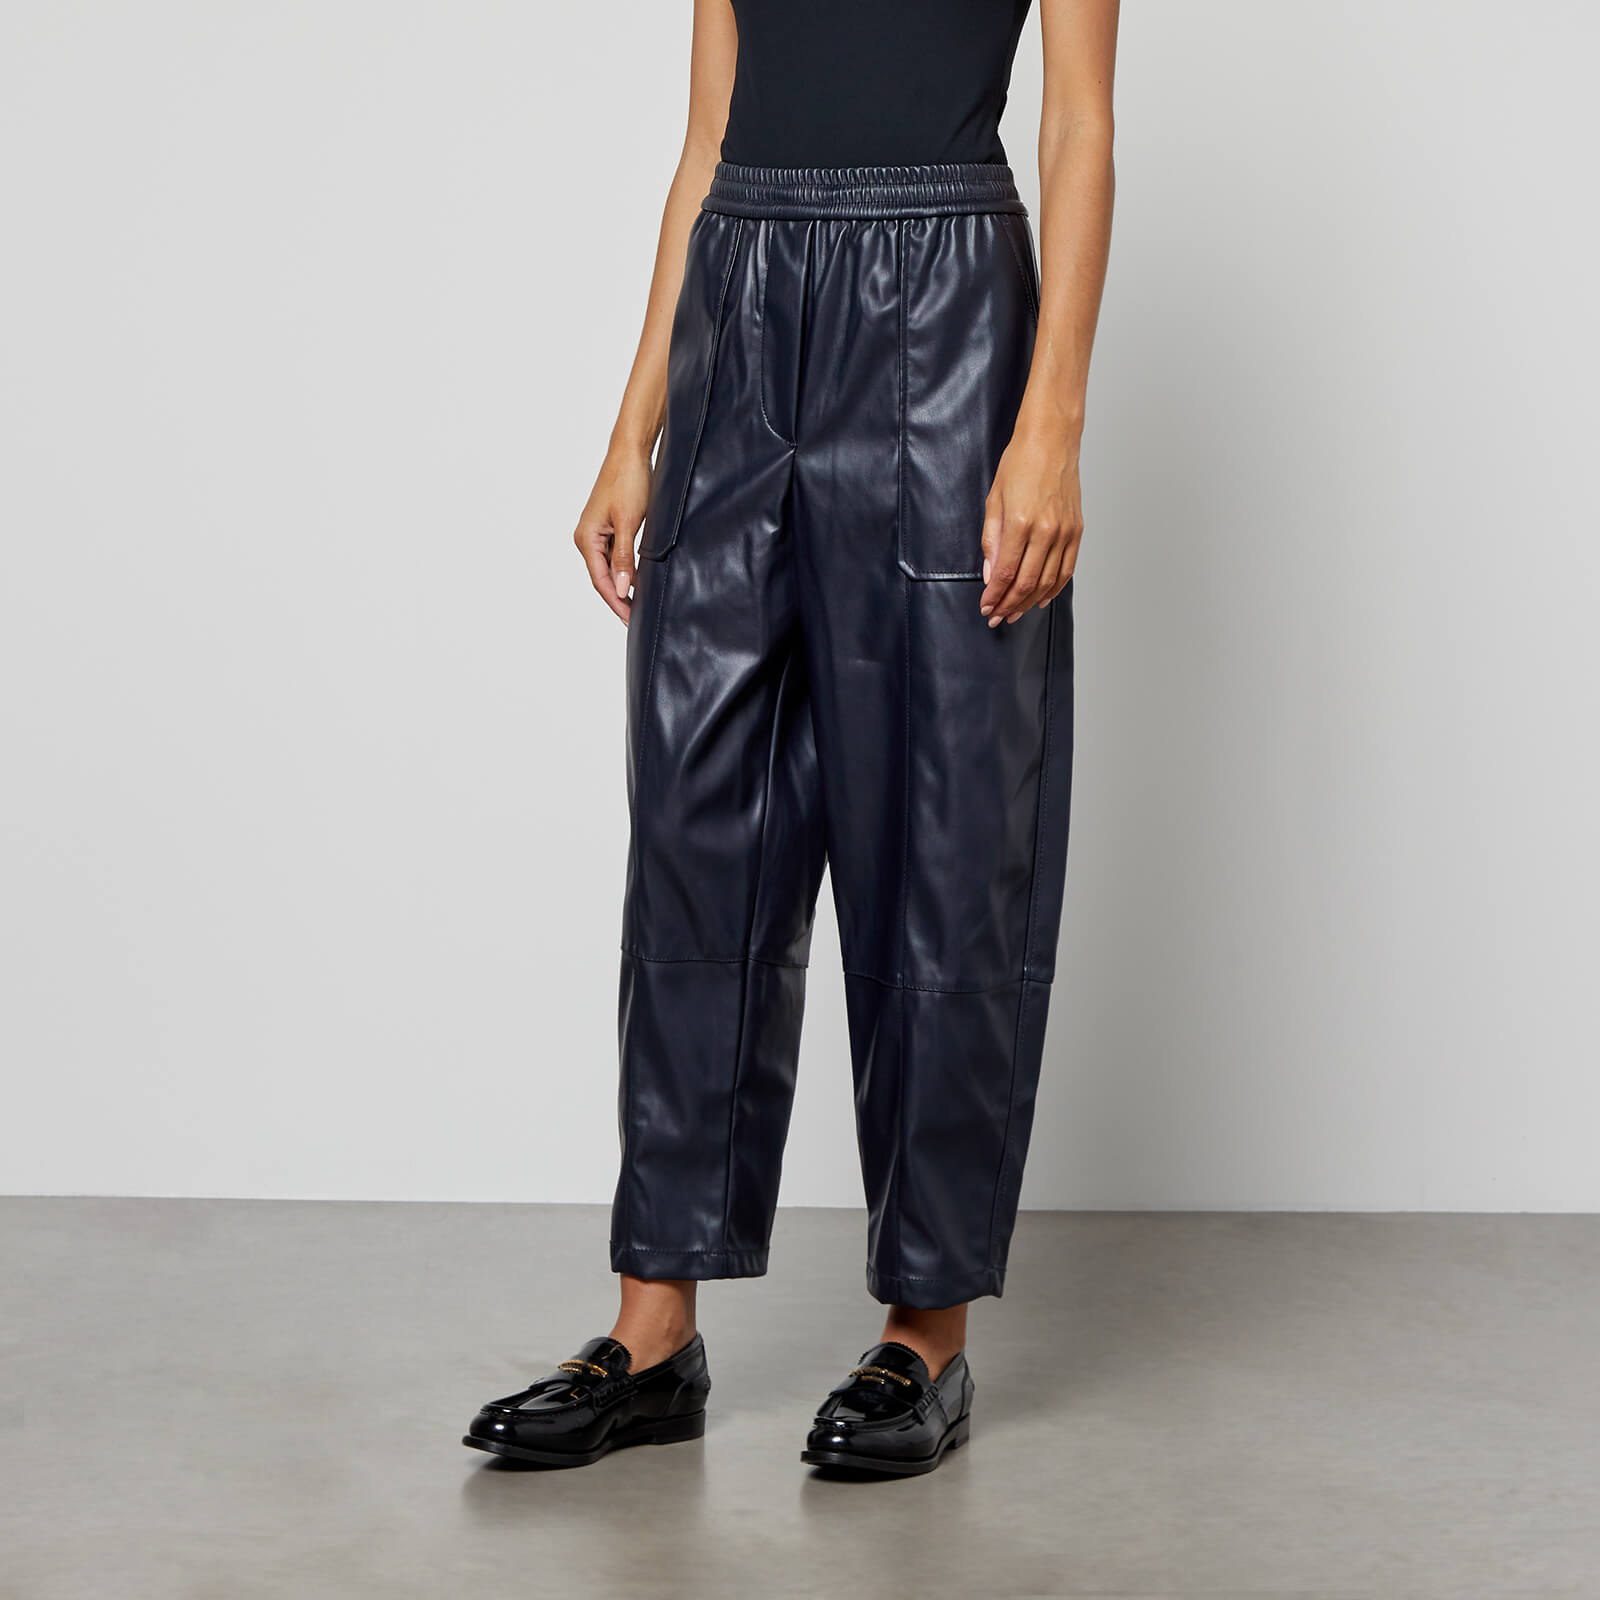 3.1 phillip lim cropped faux leather tapered trousers - s